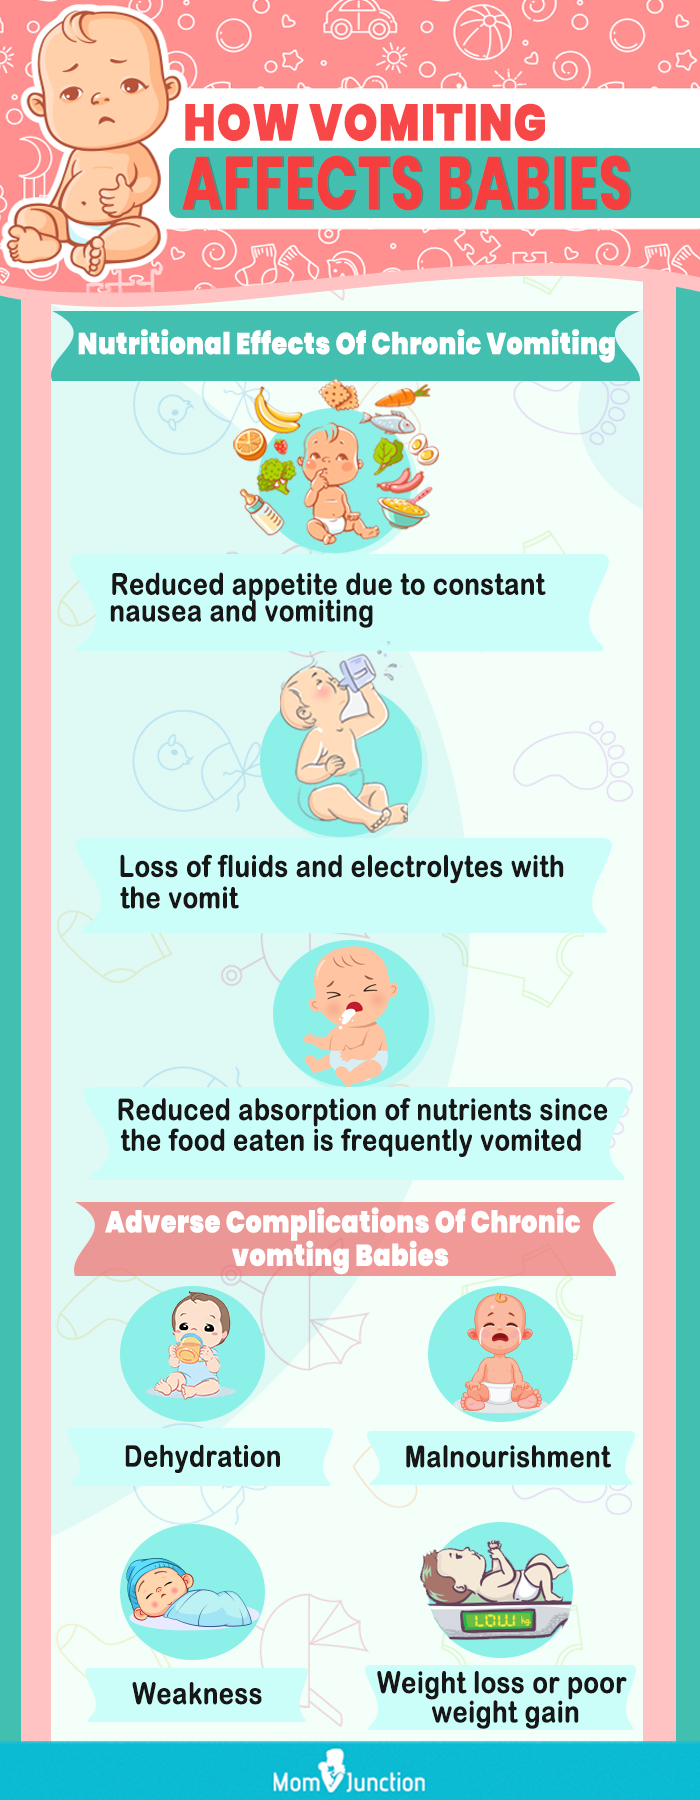 complications of vomiting in babies (infographic)